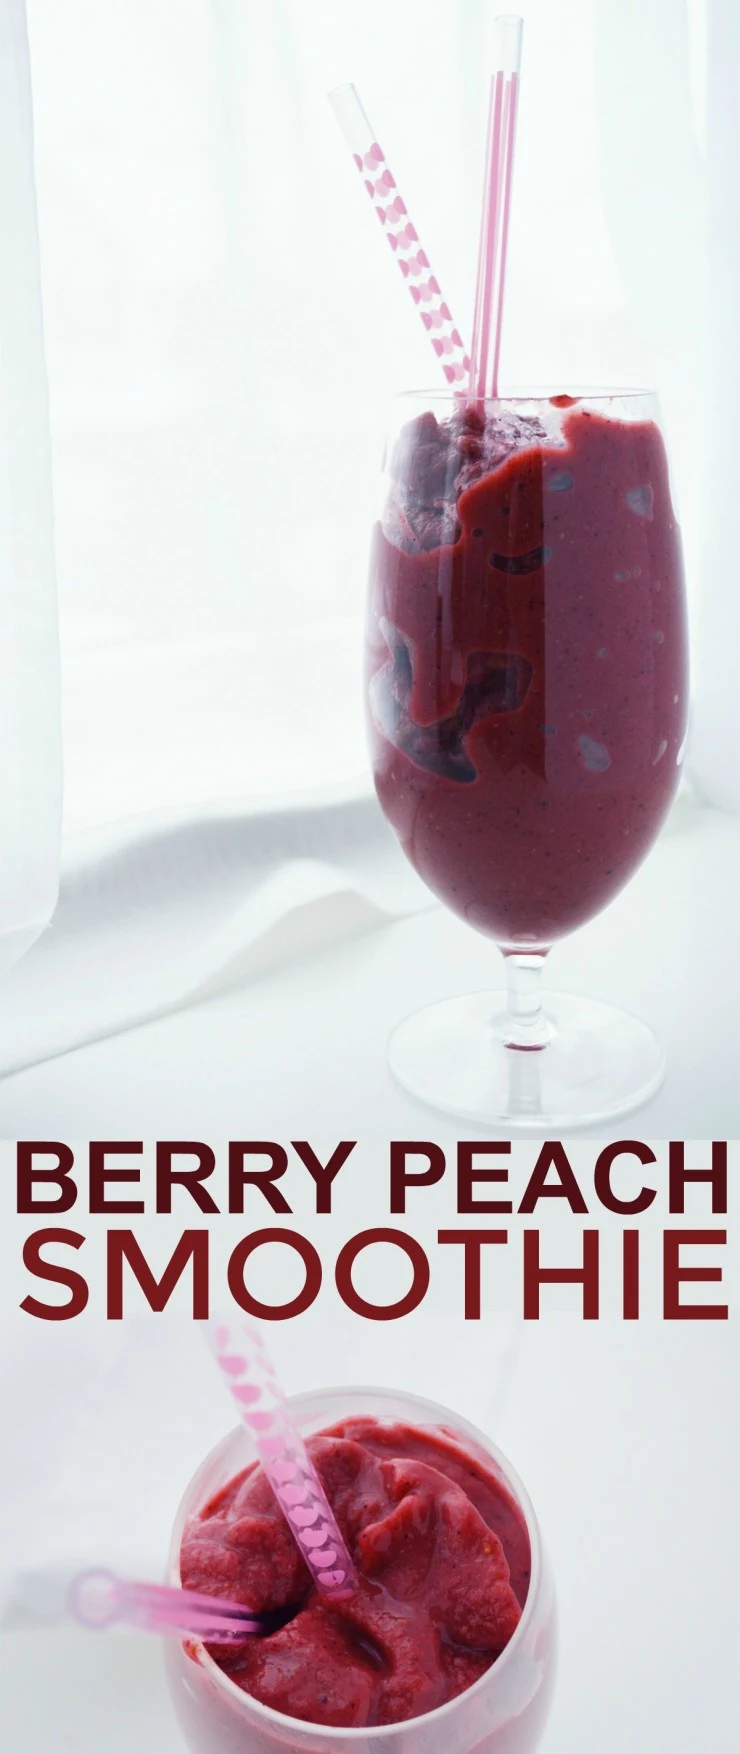  Surprise your tastebuds with a heart-healthy berry peach smoothie - it's dairy free and delish!  You can't go wrong with this mix of fruit and almond milk yogurt!